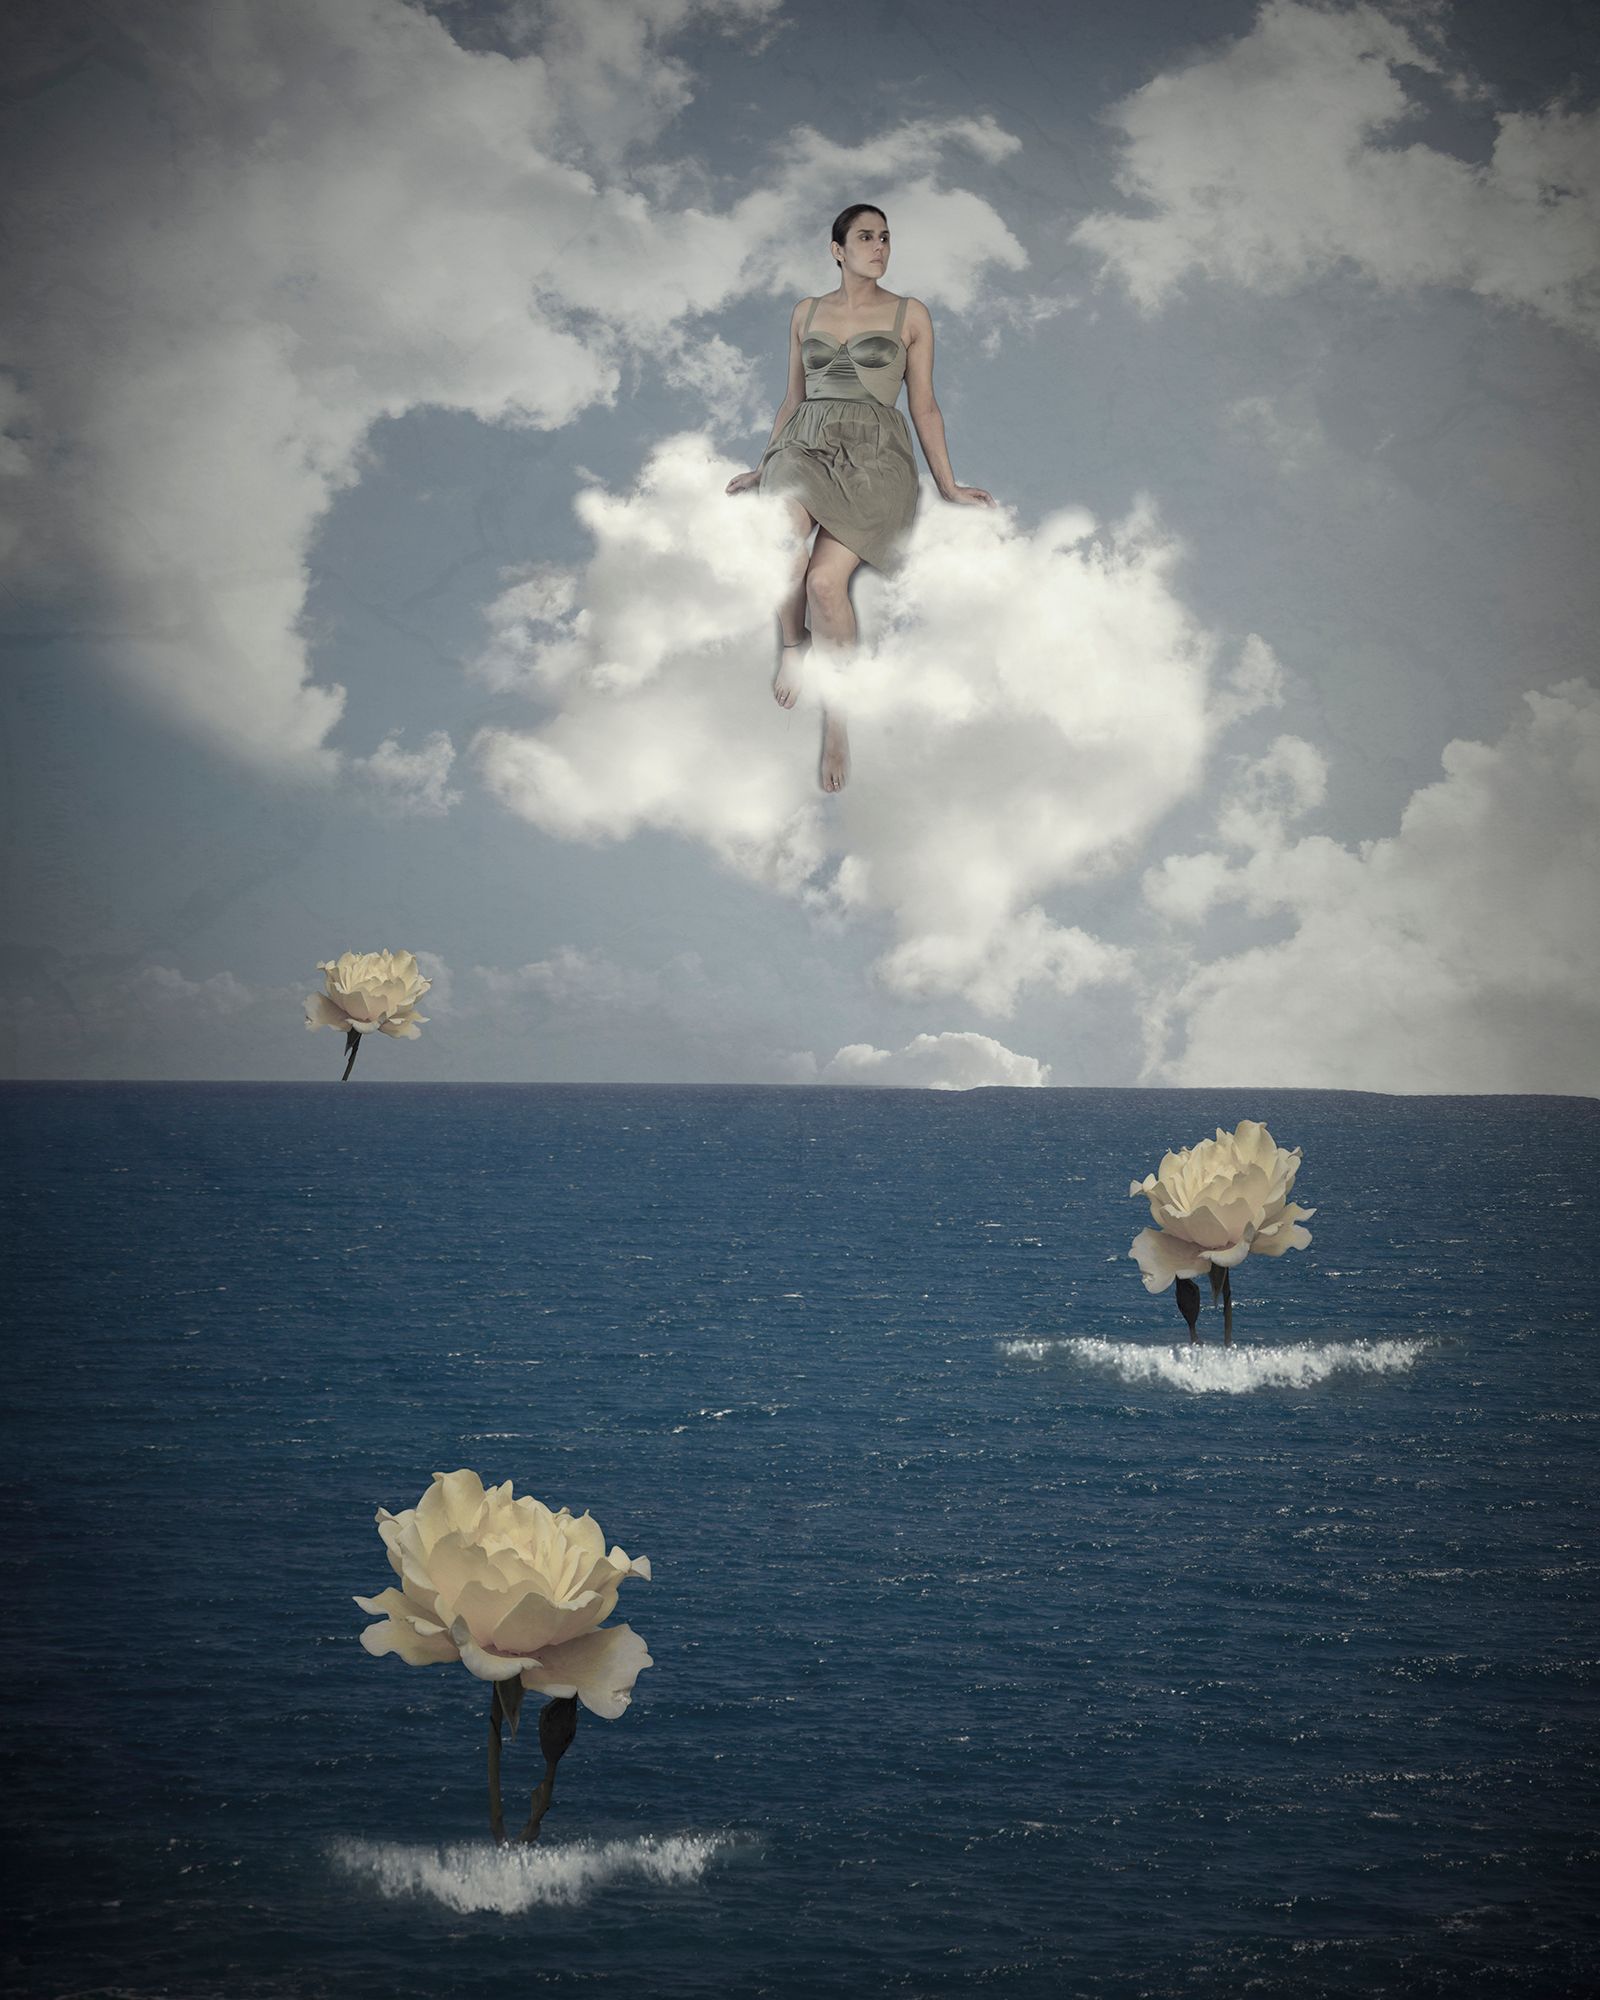 © Viviana  Torres-Mestey - Image from the Fearless Dreams: to fall, to fly, to be free photography project